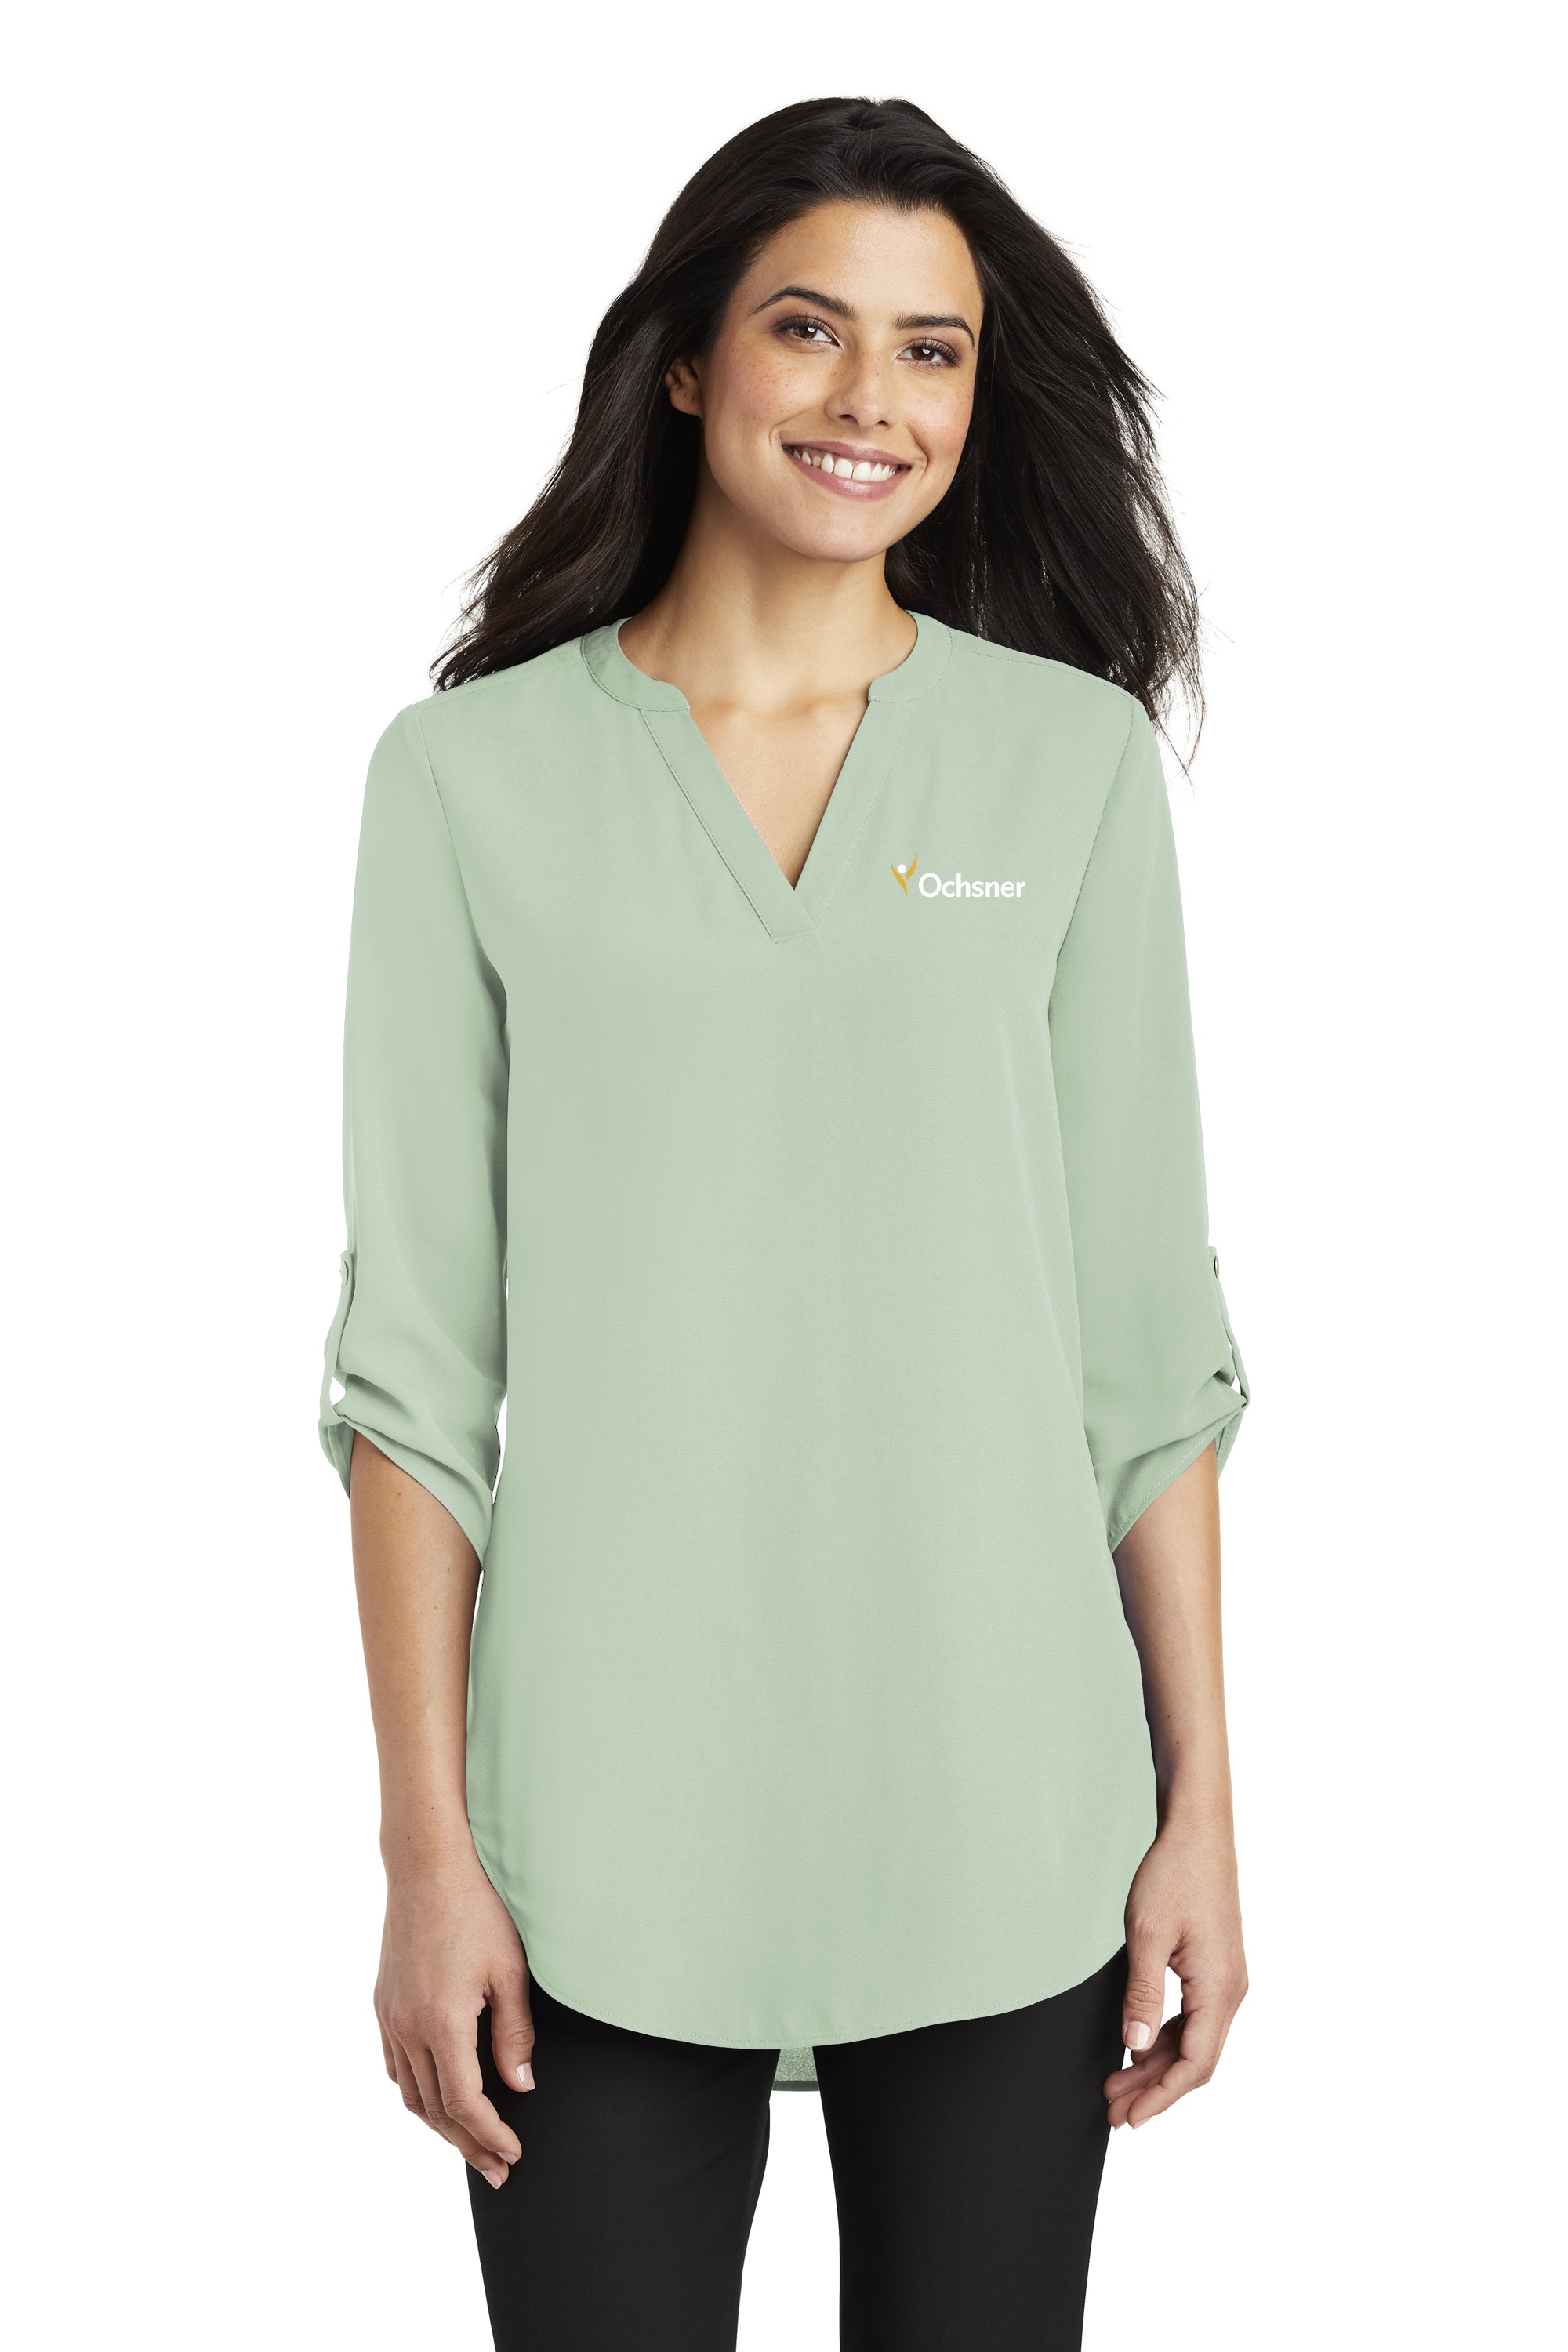 Port Authority Women's 3/4 Sleeve Tunic Blouse, Green, large image number 1